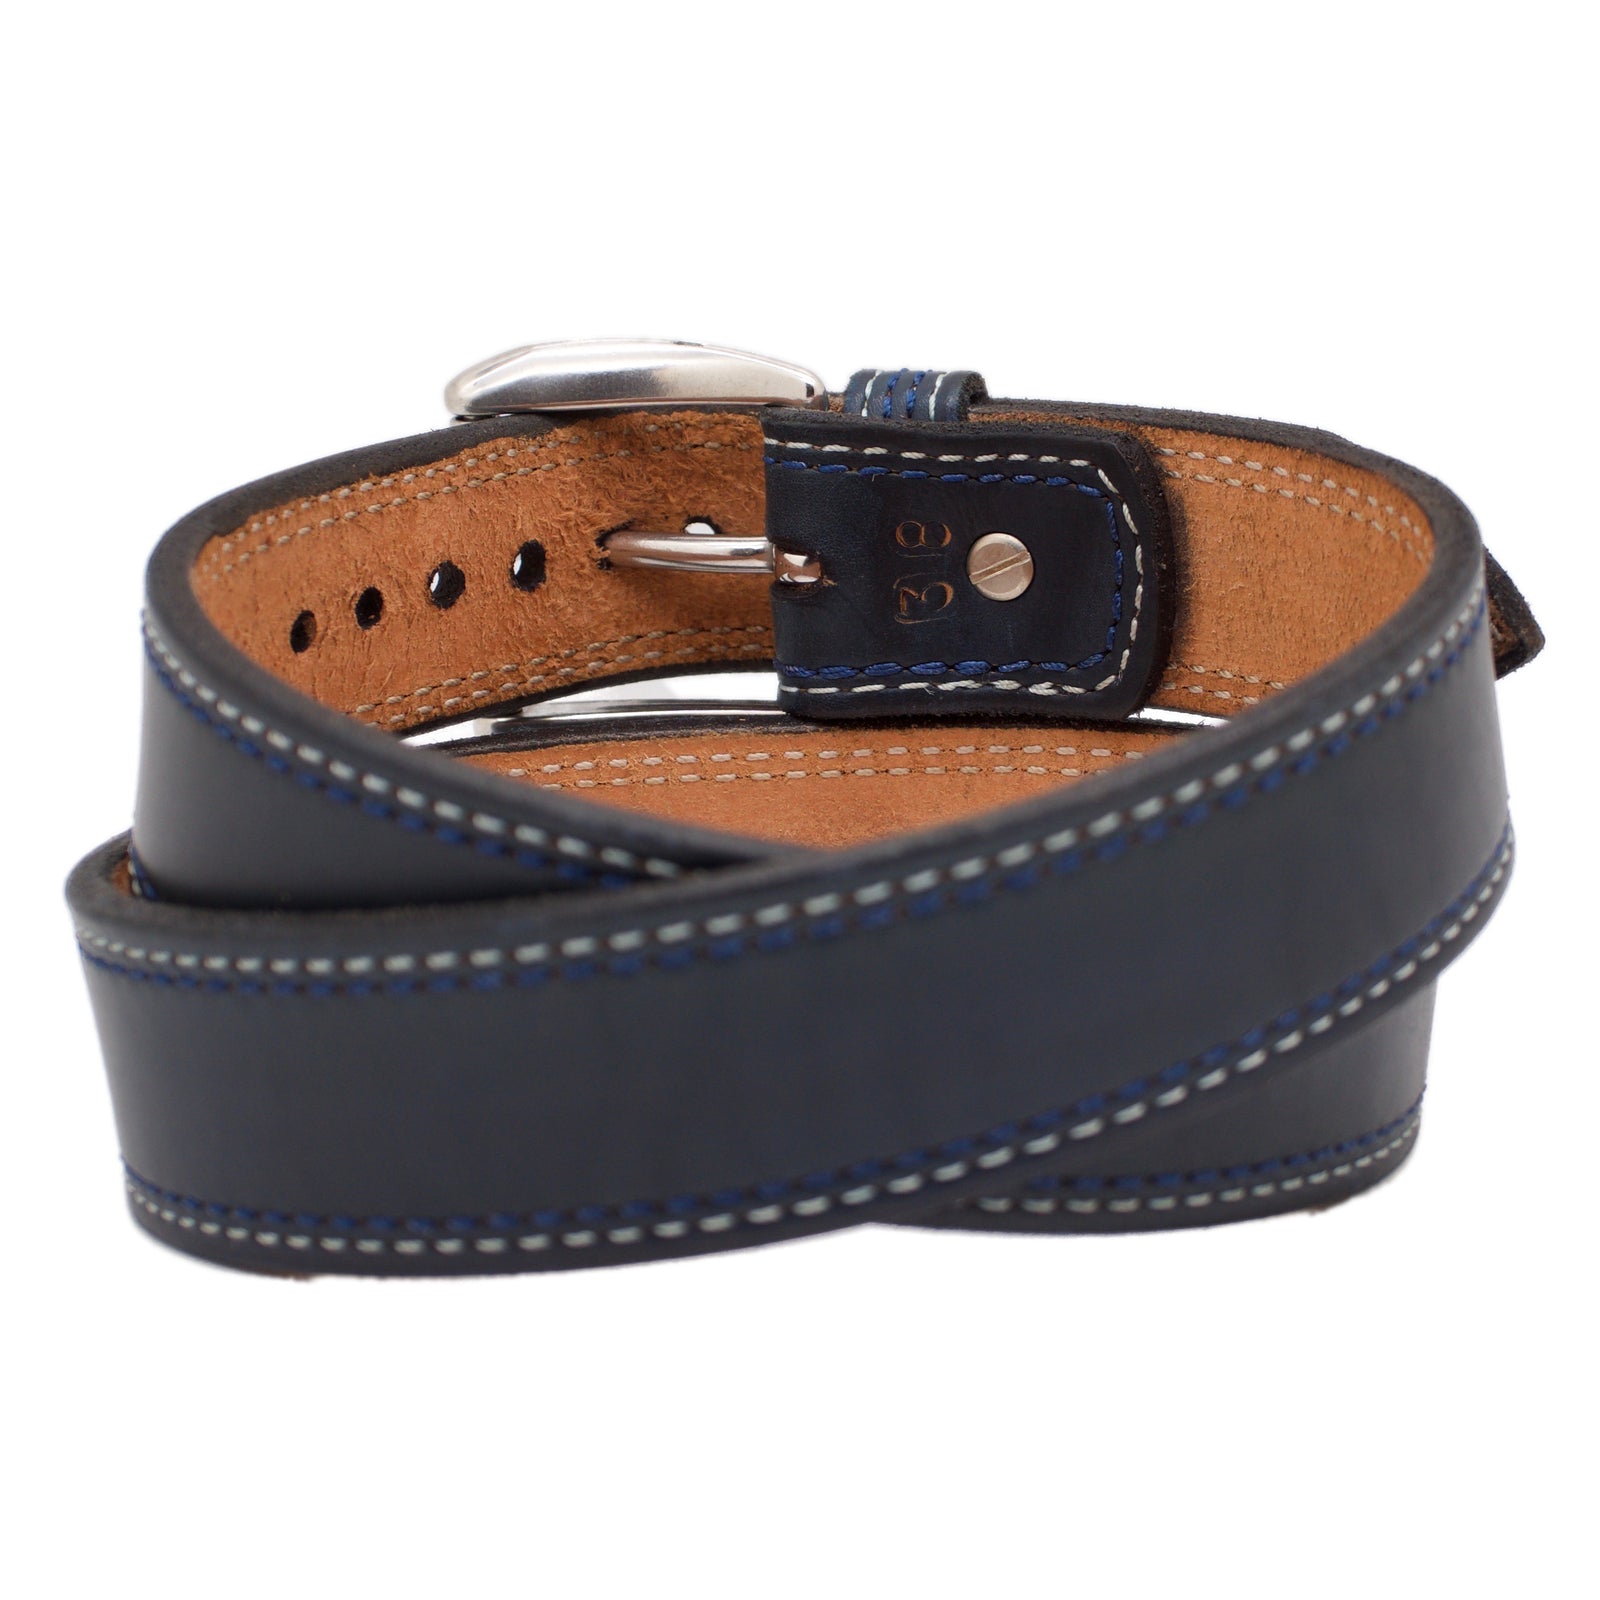 The BELMONT WIDE 1.75 Leather Belt